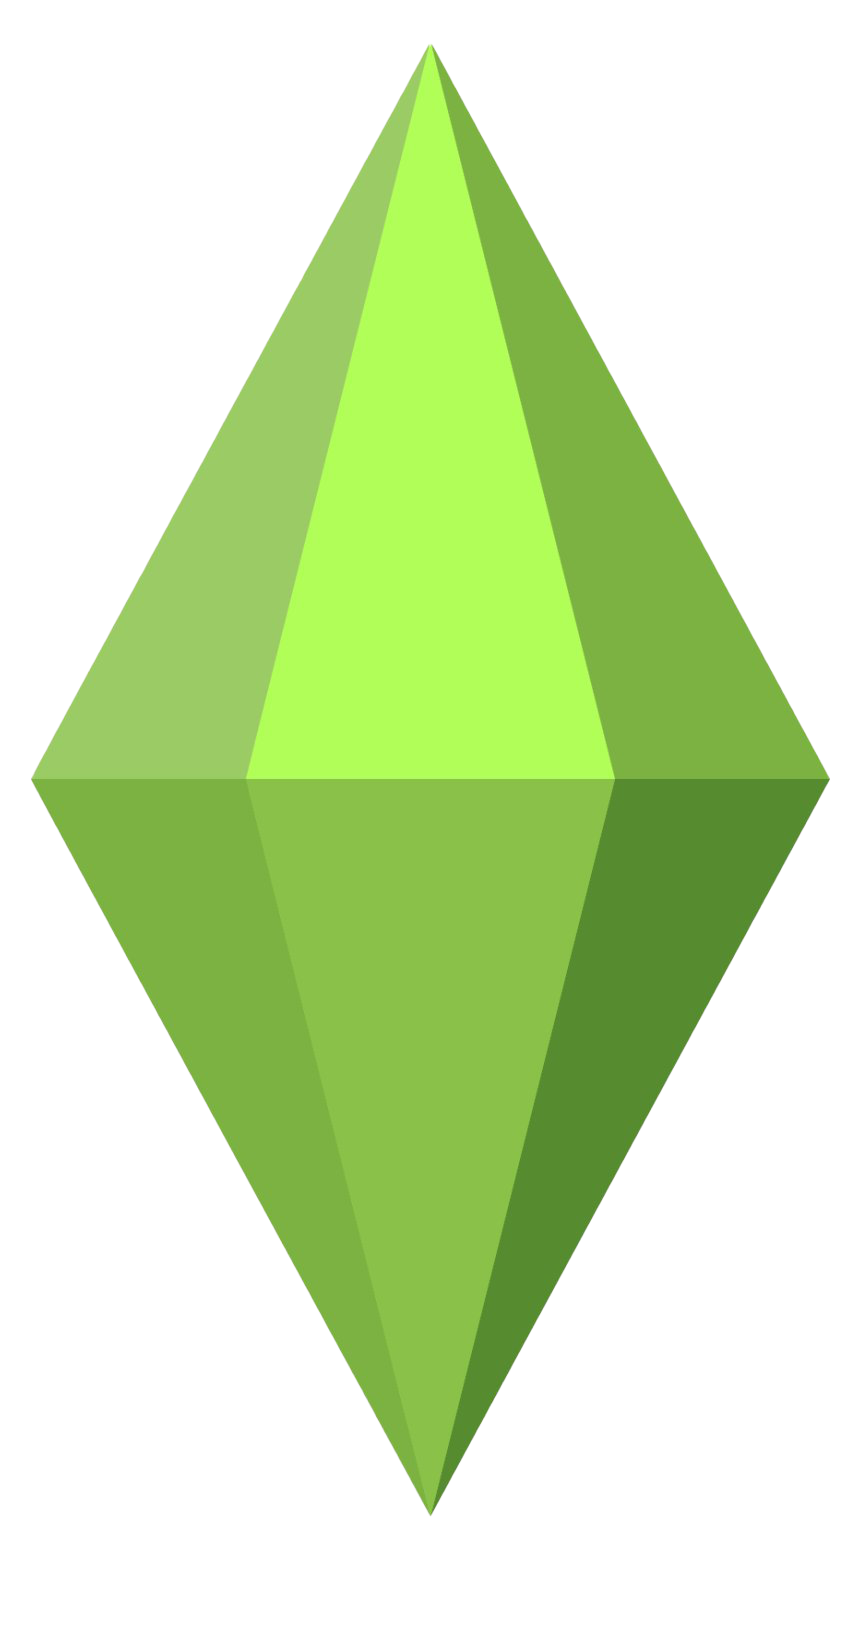 The Sims Diamond PNG Foto